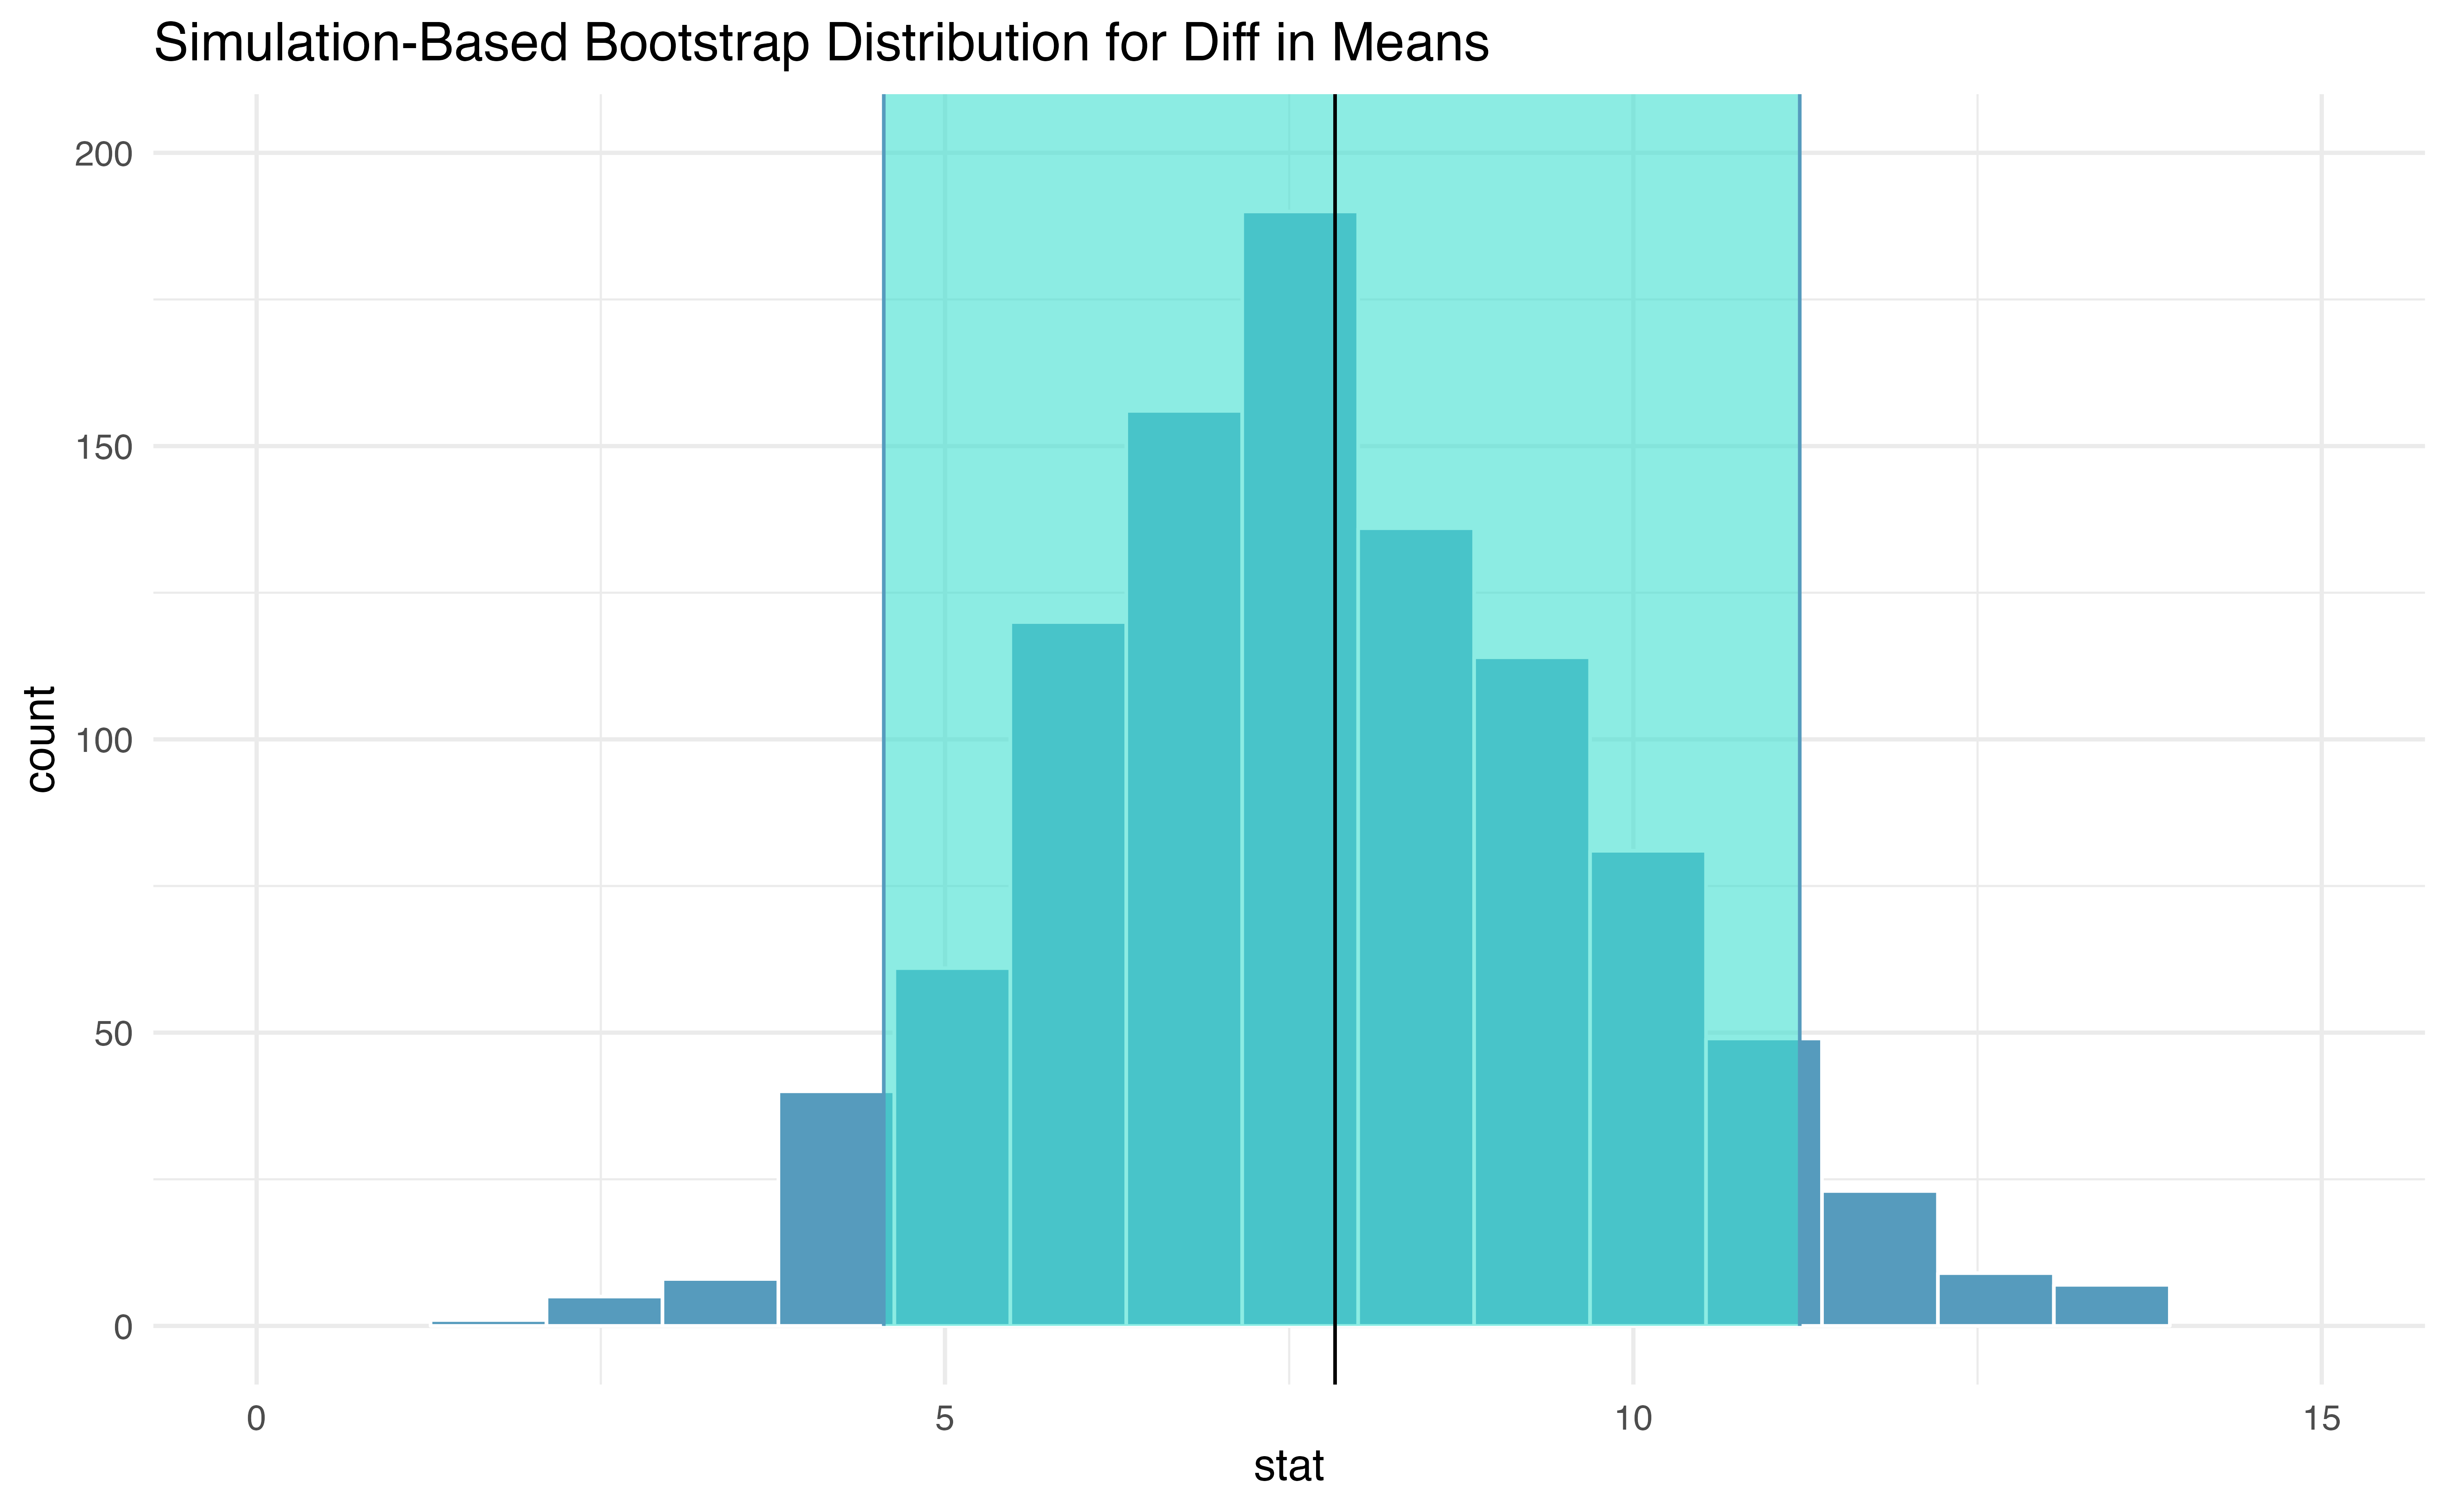 Histogram of differences in means after 1000 bootstrap resamples are taken from each of the two groups.  The observed difference in means from the original data is plotted as a black vertical line at 7.83.  The blue lines provide the percentile bootstrap 90% confidence interval for the difference in true population means.